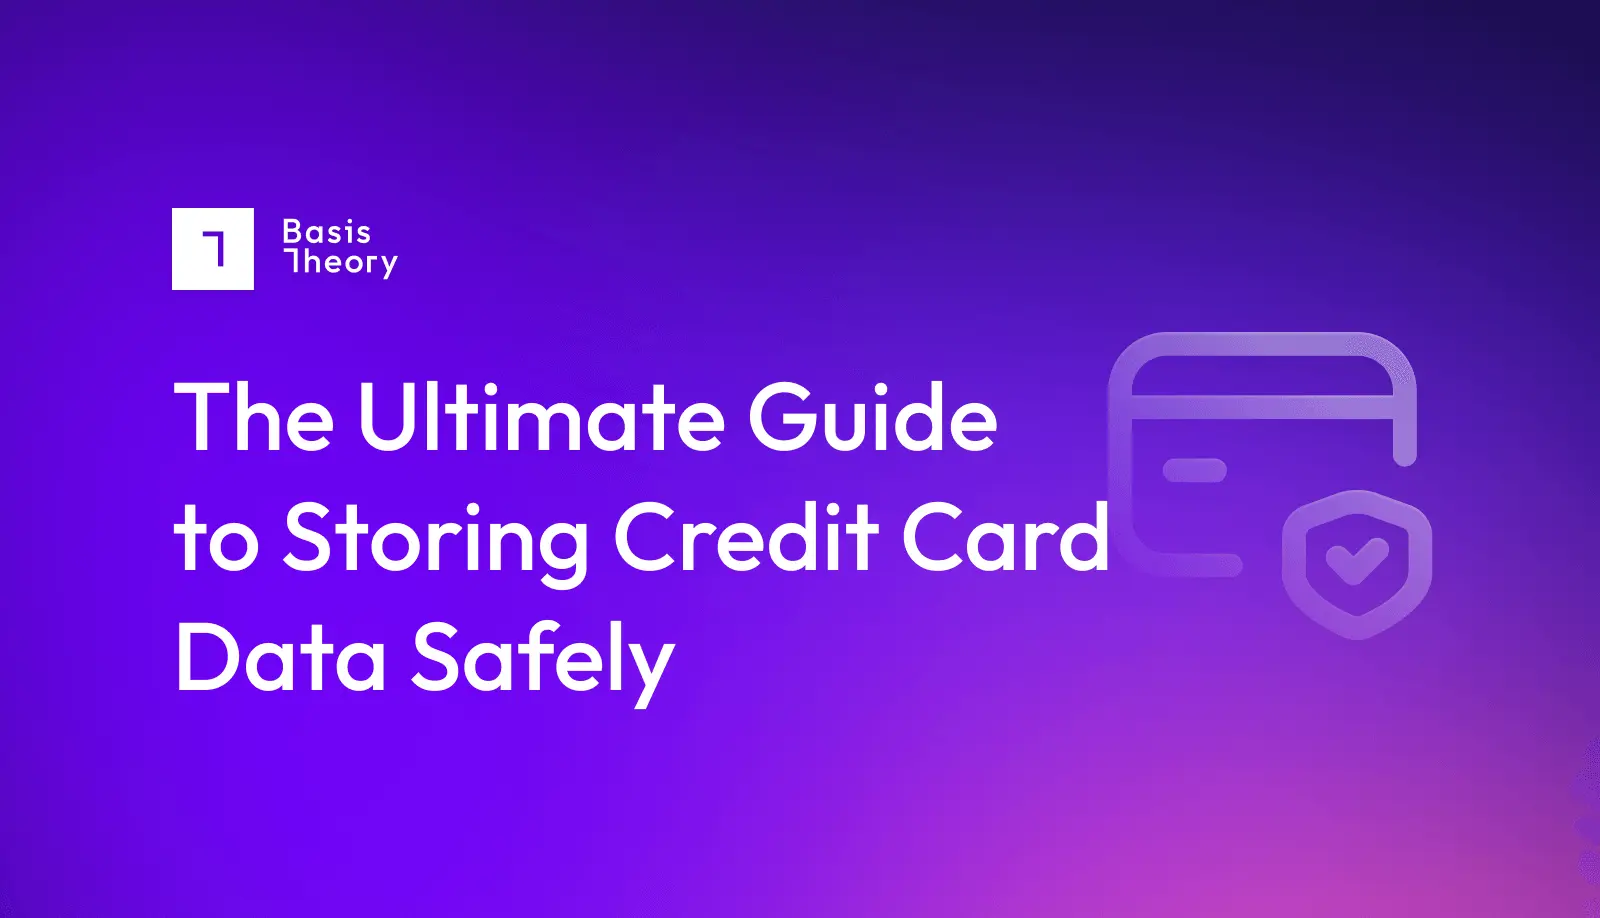 The ultimate guide to storing credit card data securely